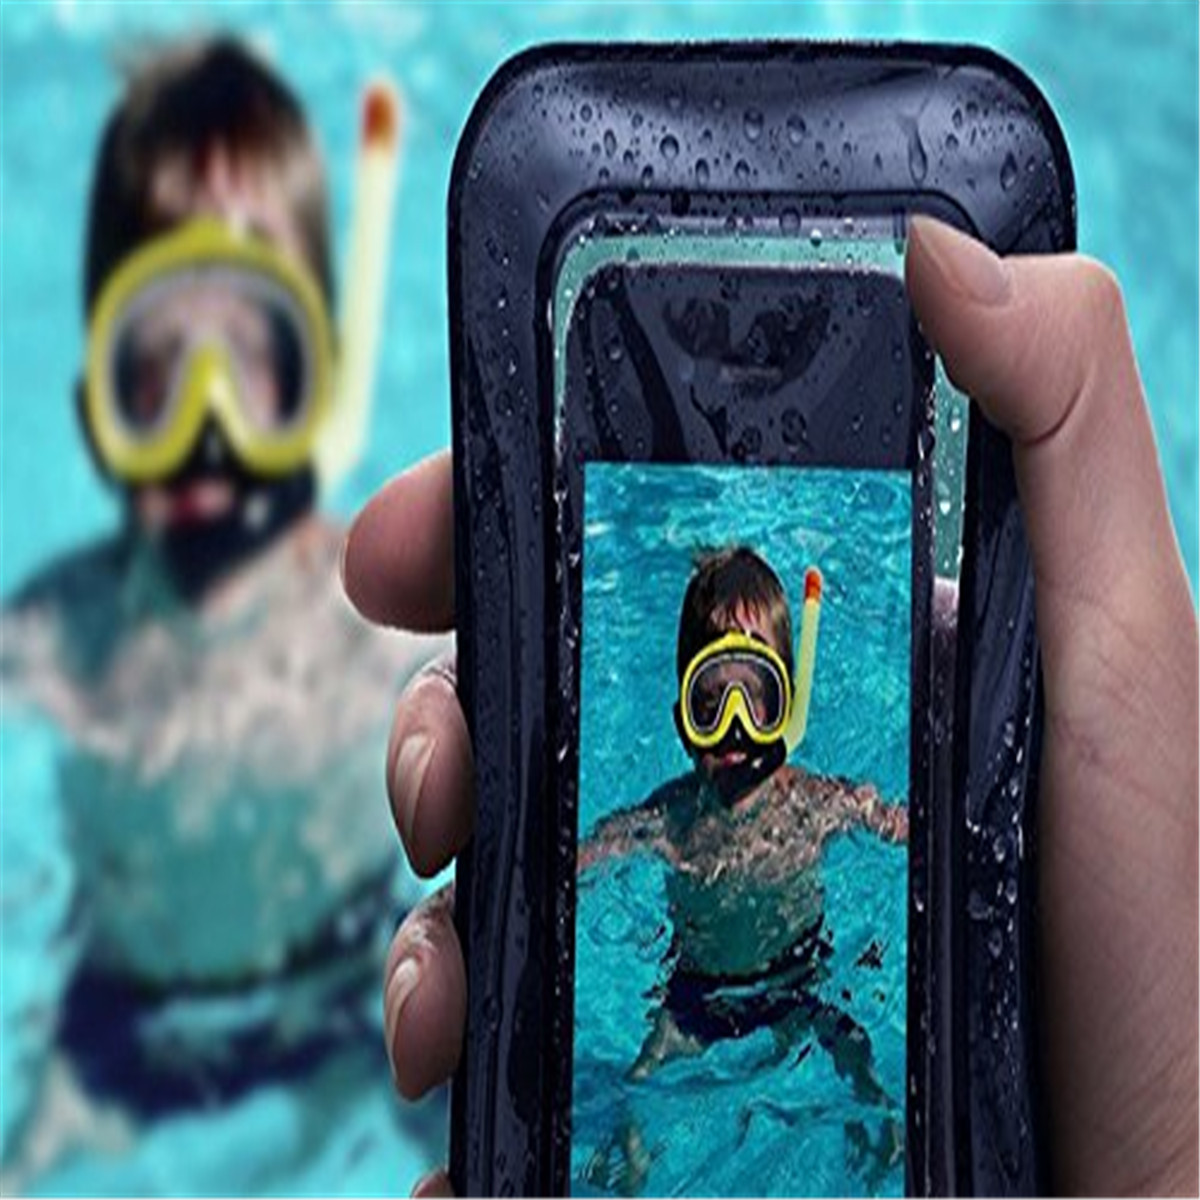 Portable-HD-Touch-Screen-Mobile-Phone-Waterproof-Dry-Bags-Swimming-Ski-Sports-Packs-for-iPhone-Devic-1890828-6